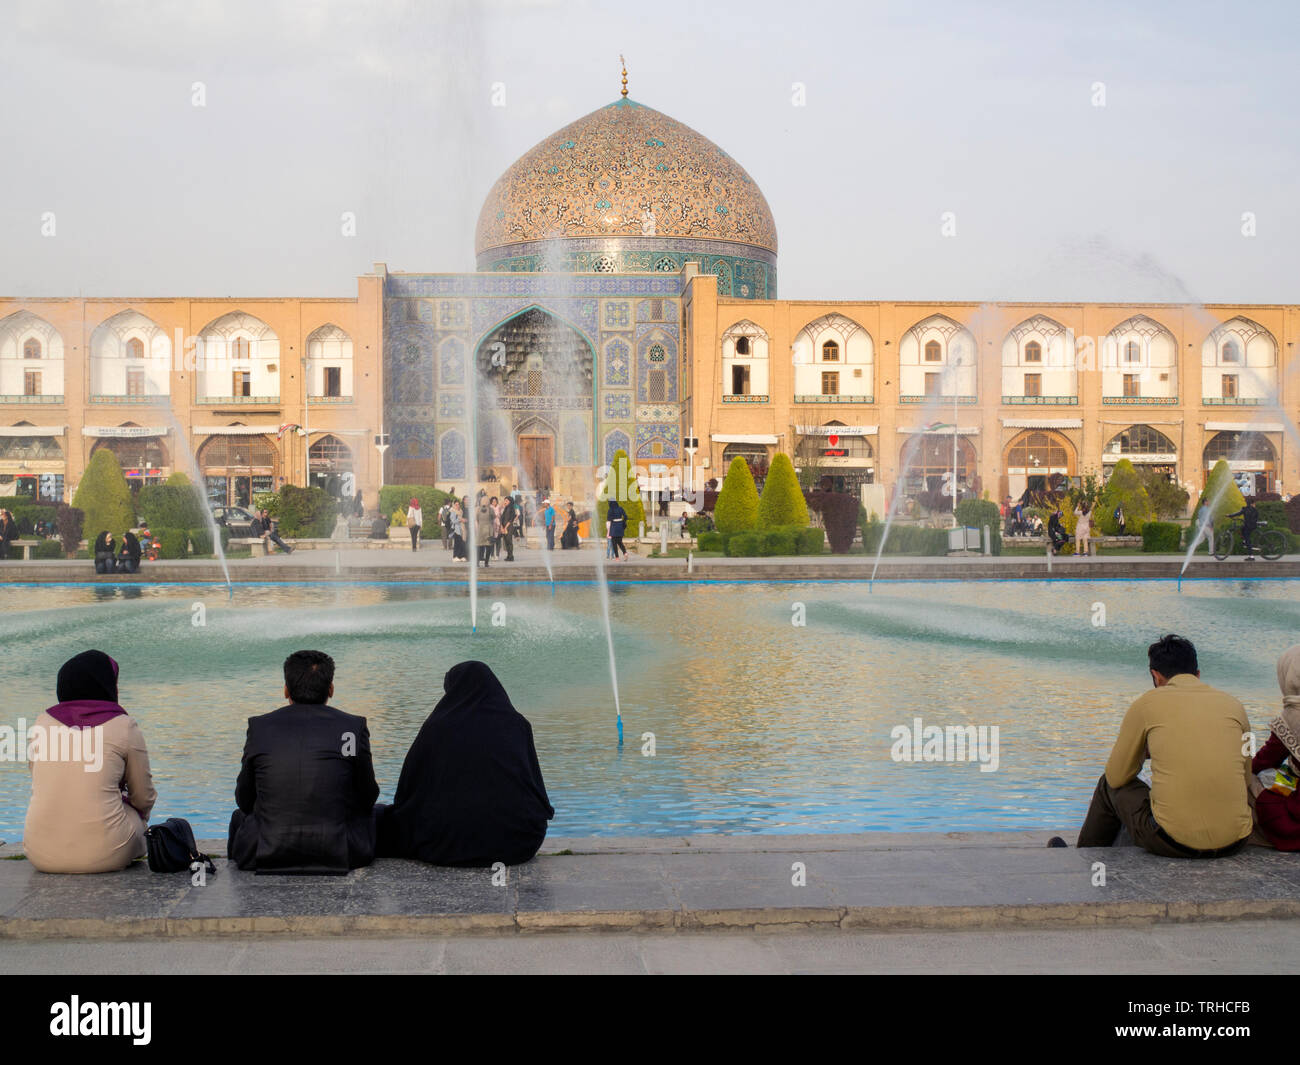 People watching the sun set over Lotfollah Mosque at Maydan-e Imam Square, also known as Naqsh-e Jahan Square, in Esfahan, Iran. It is a UNESCO World Stock Photo